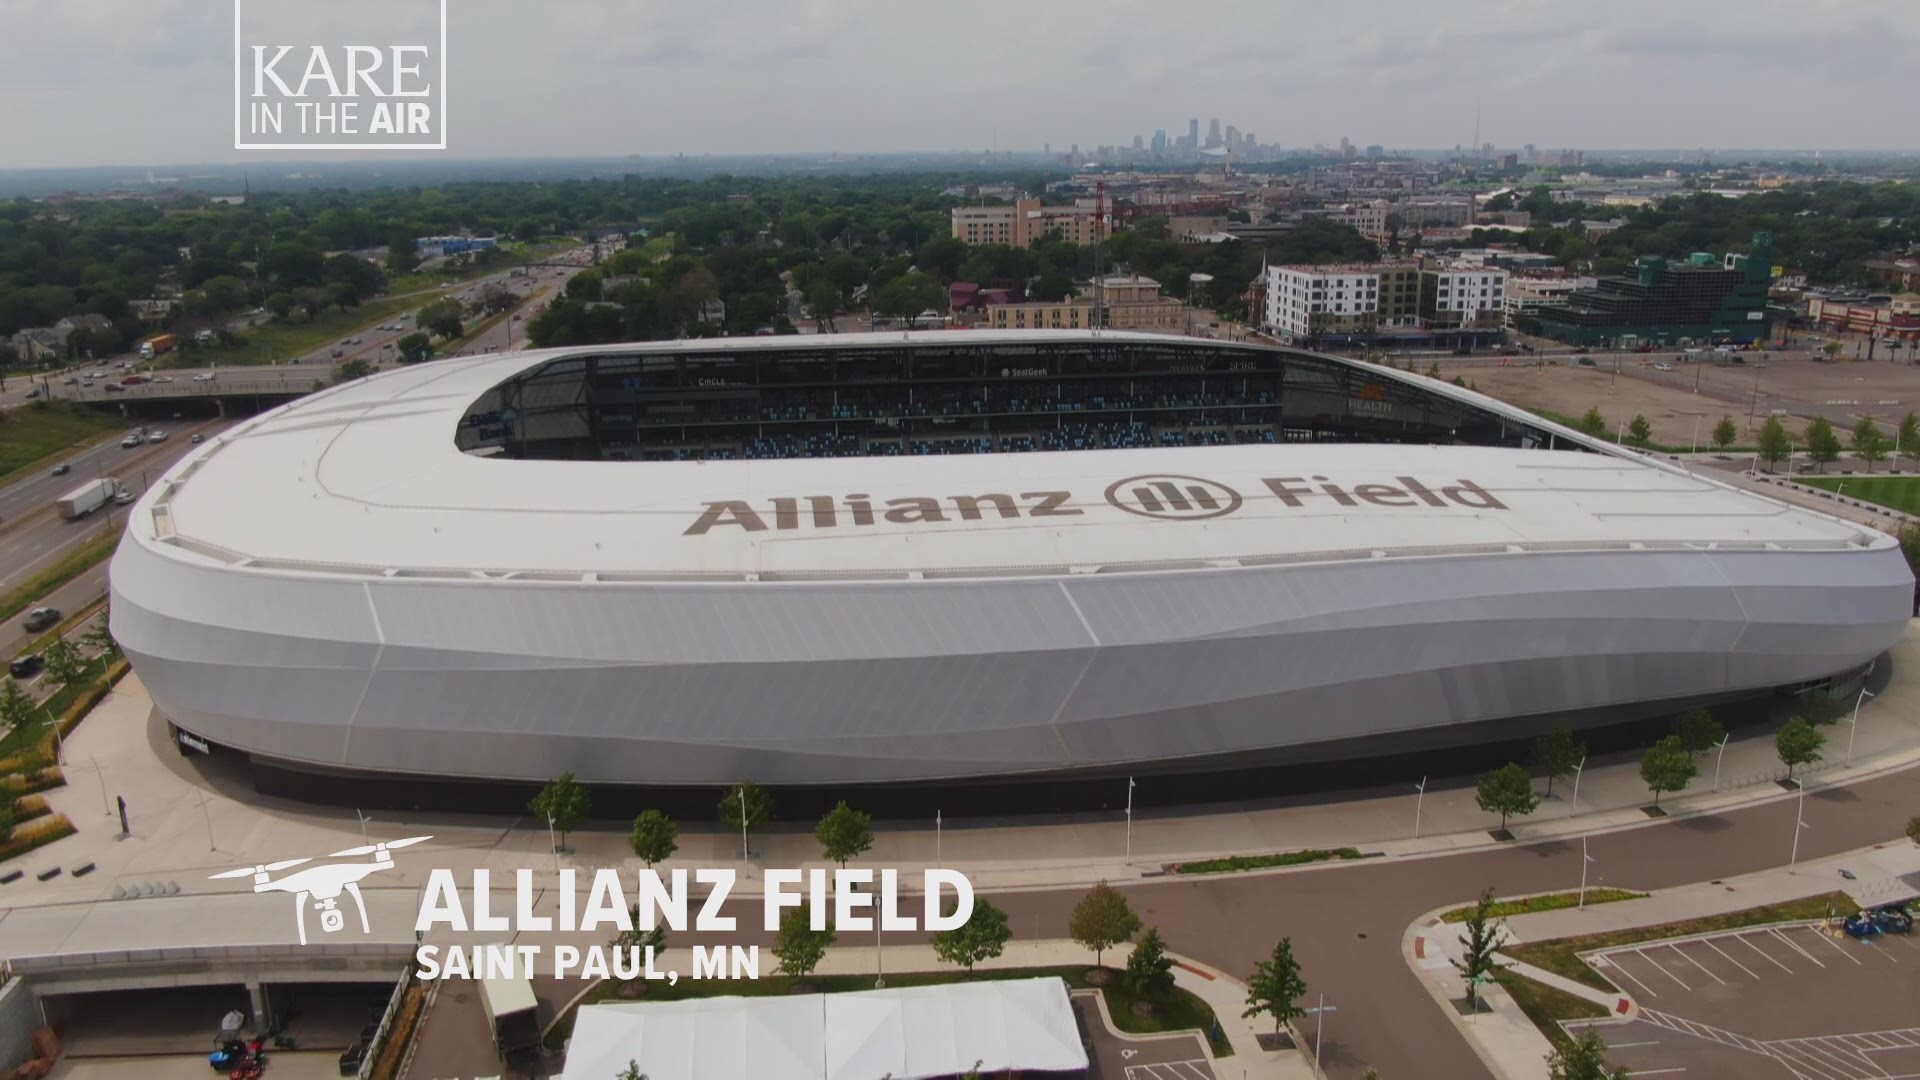 In this installment of our summer series "KARE in the Air" our drone checks out the unique architectural statement known as Allianz Field.